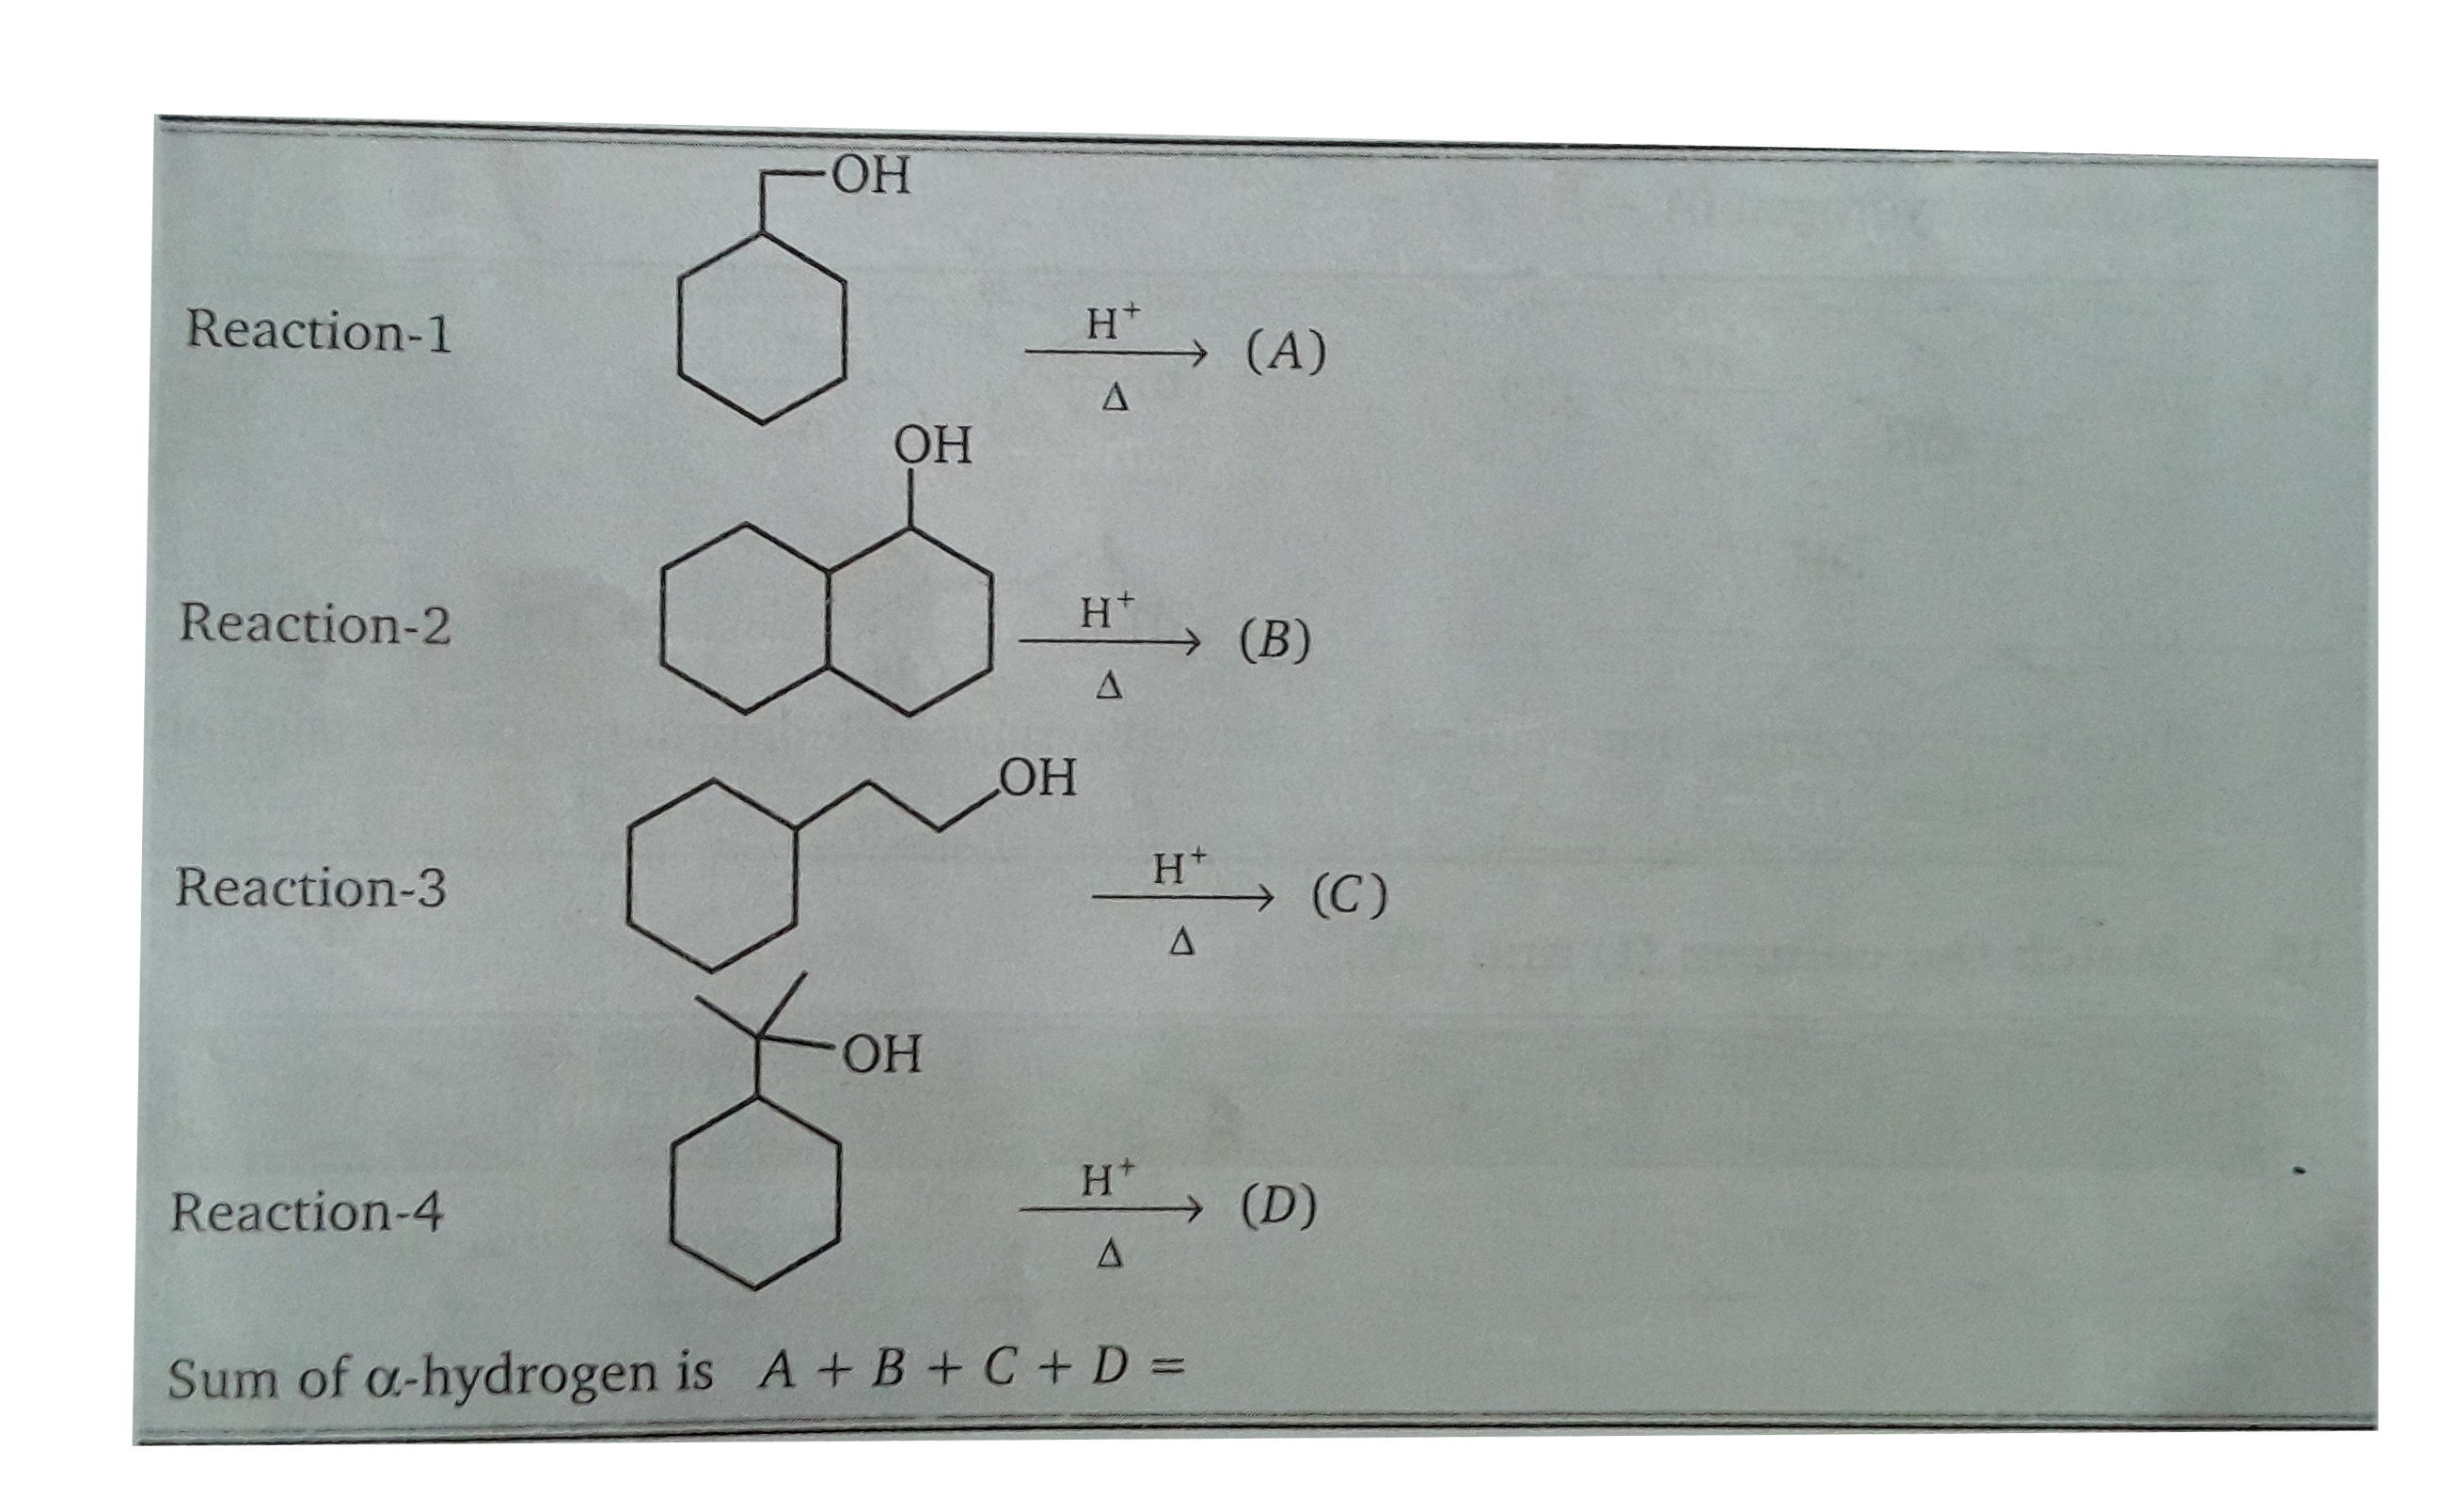 sum of alpha hydrogen in major product of the reaction .